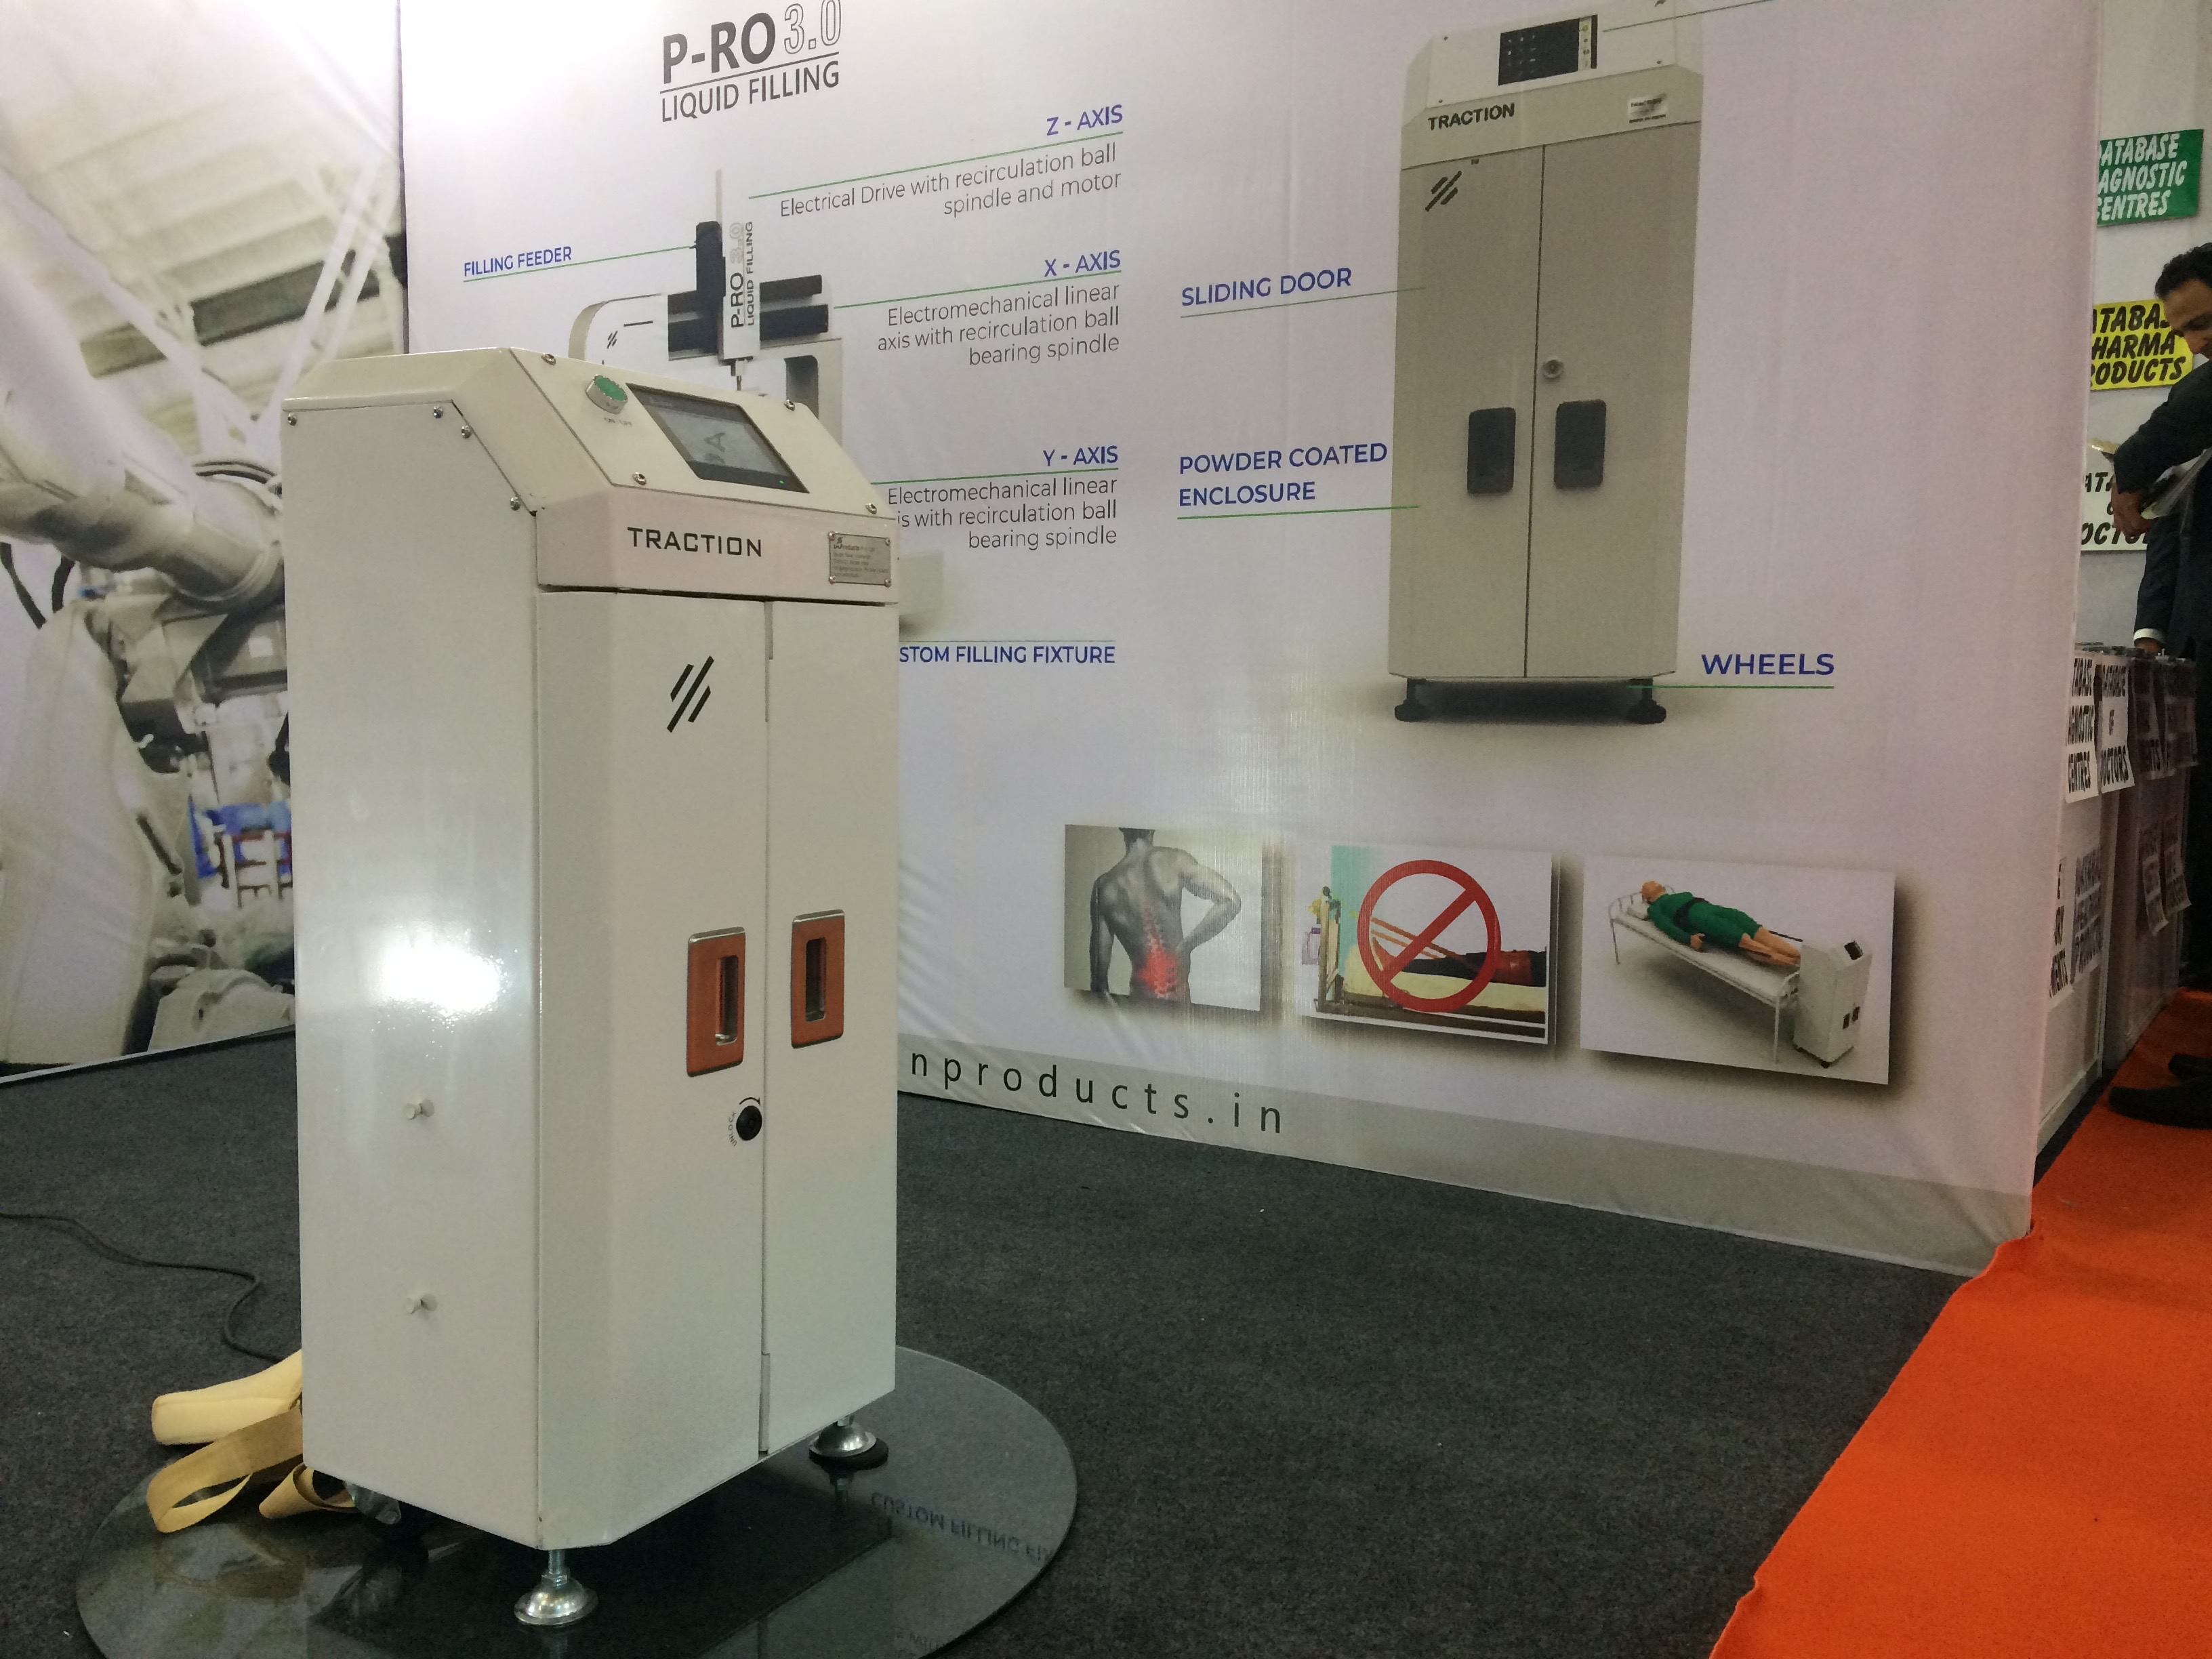 enProducts Exhibits "Traction" in India Medical Device 2018.